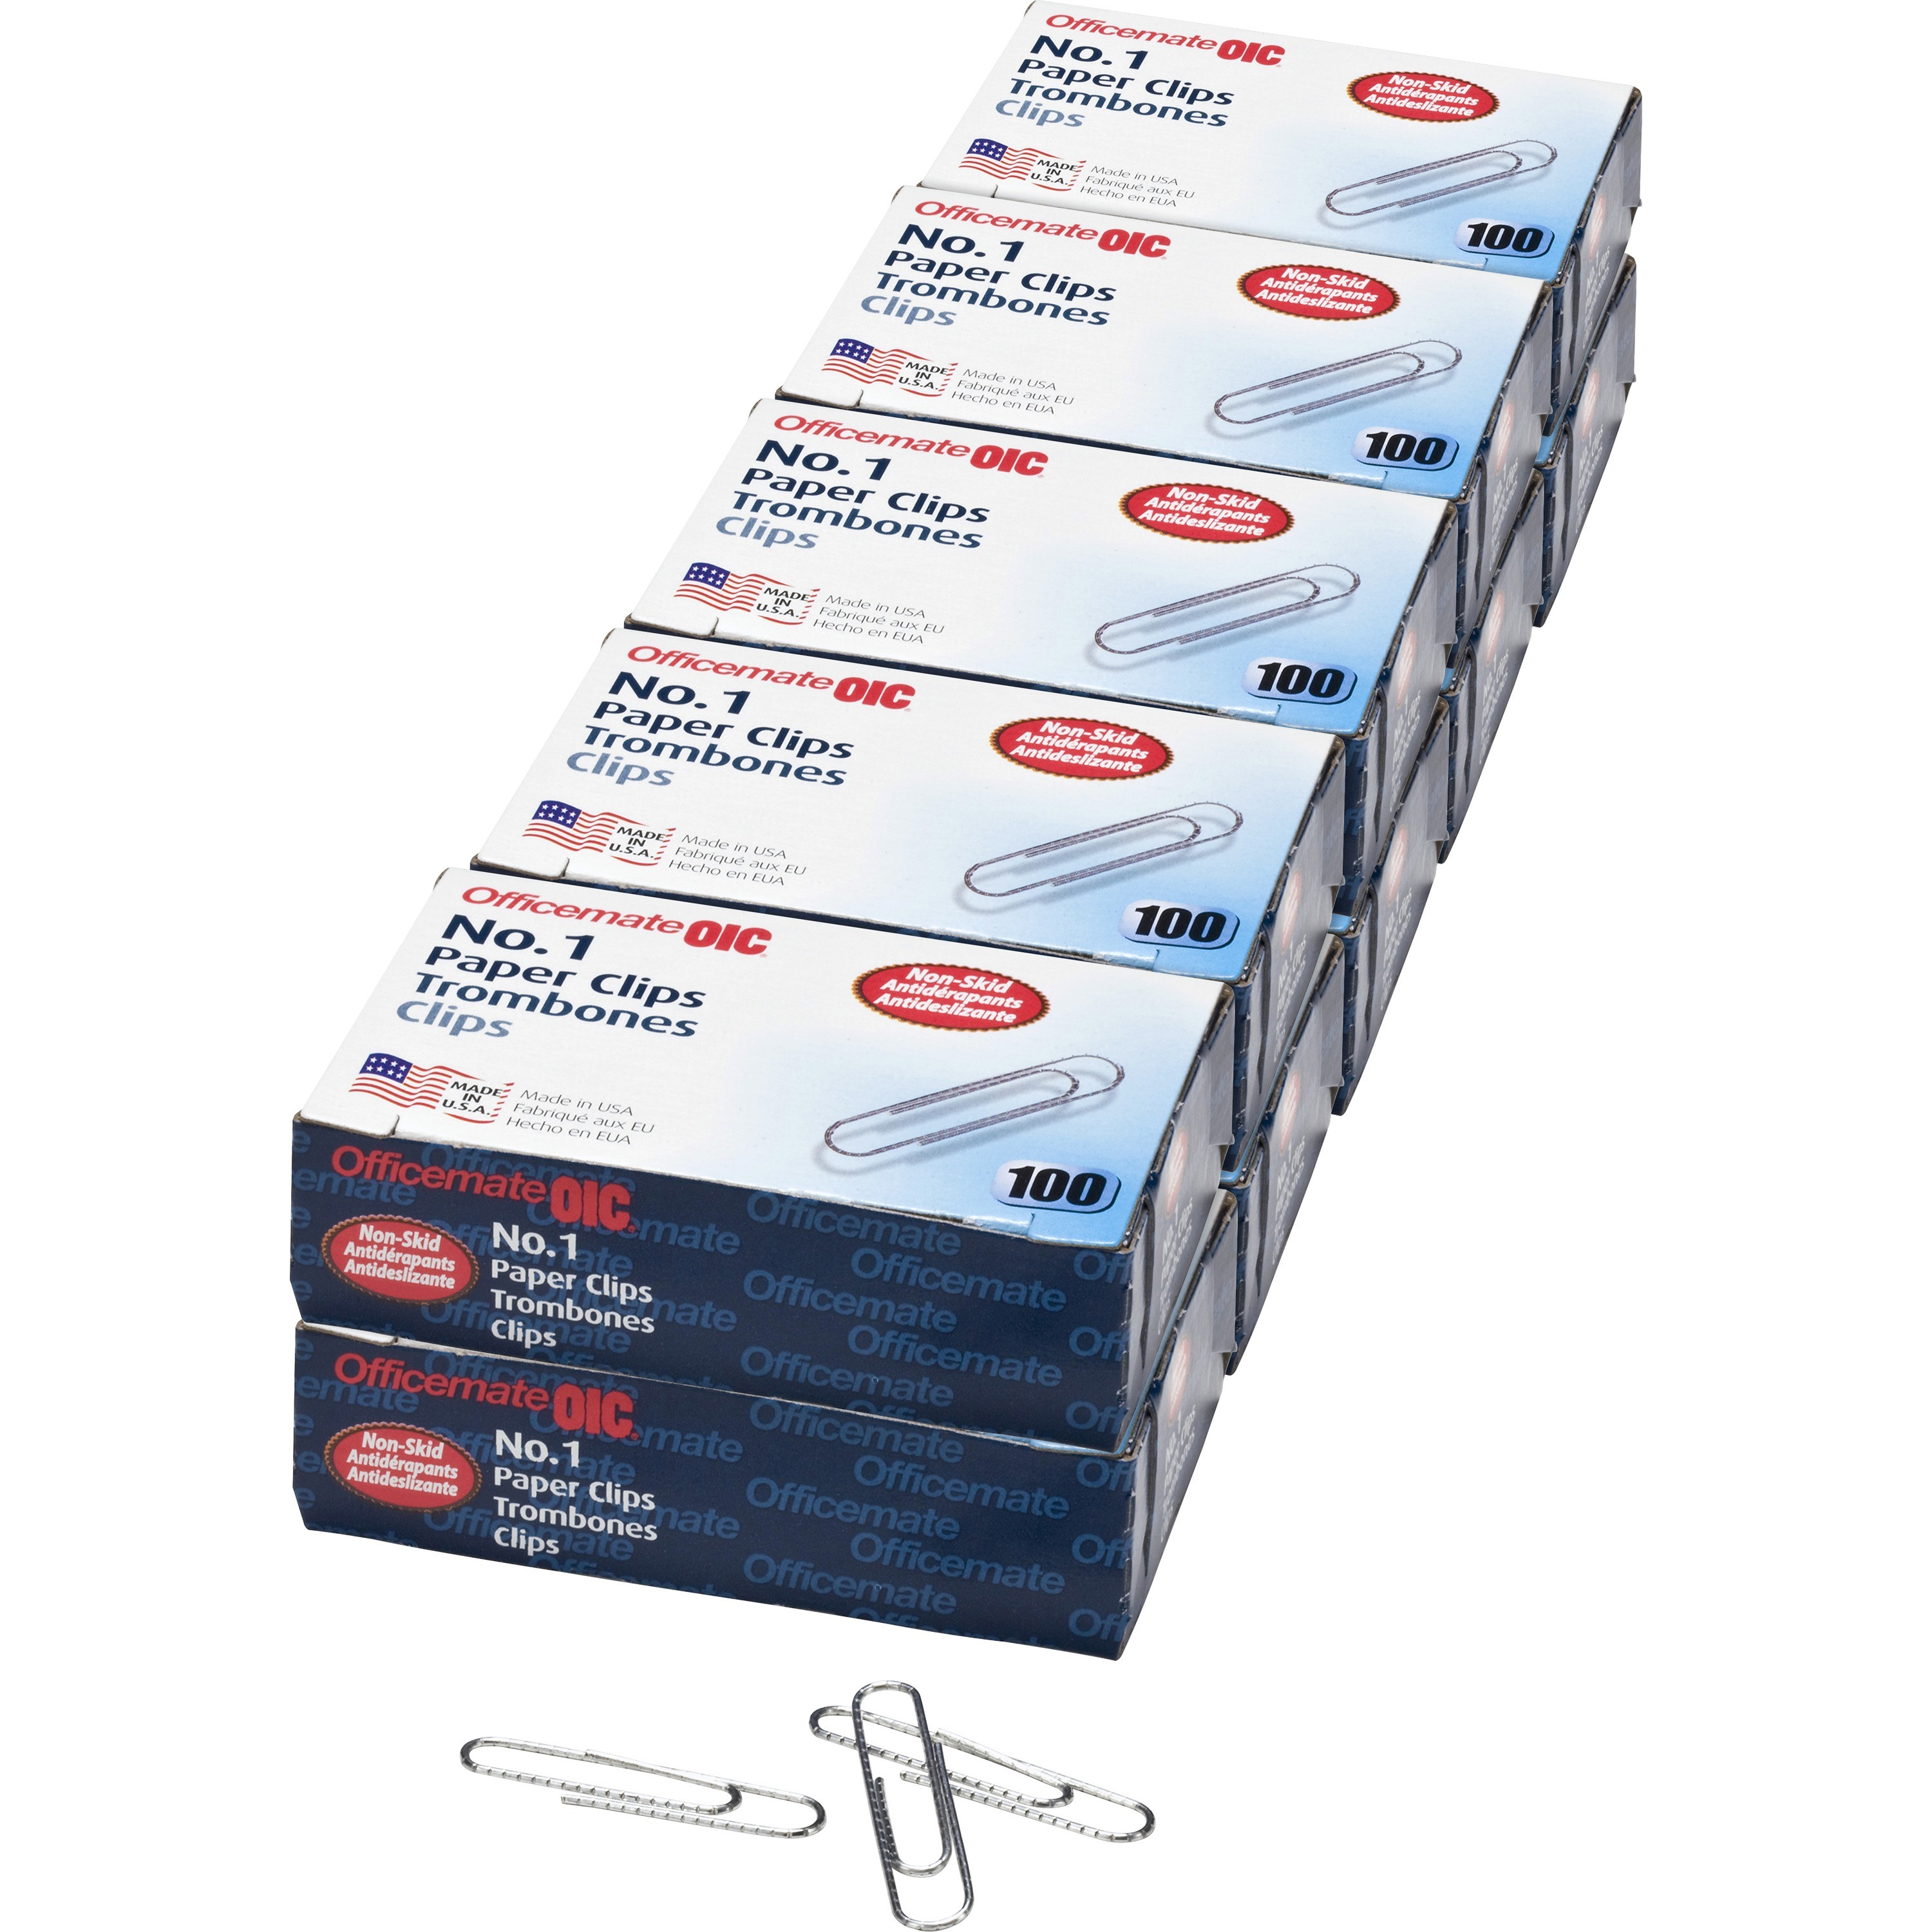 Business Source Paper Clips - Jumbo - 1000 / Pack - Silver